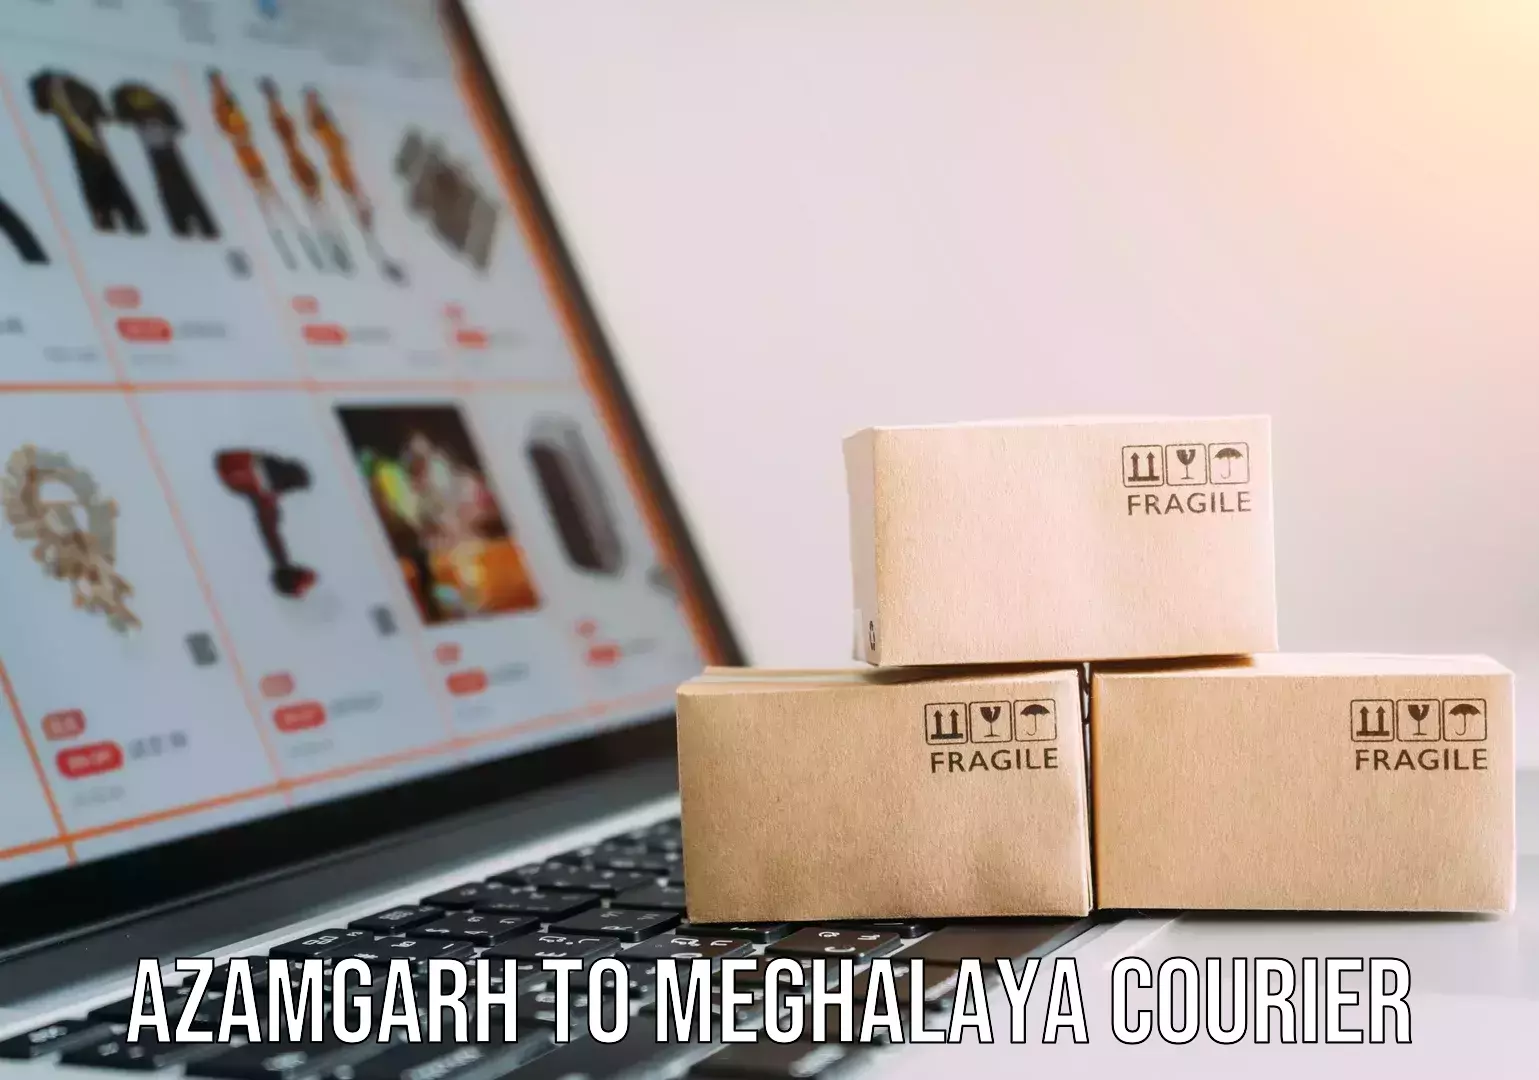 Same-day delivery solutions Azamgarh to Meghalaya